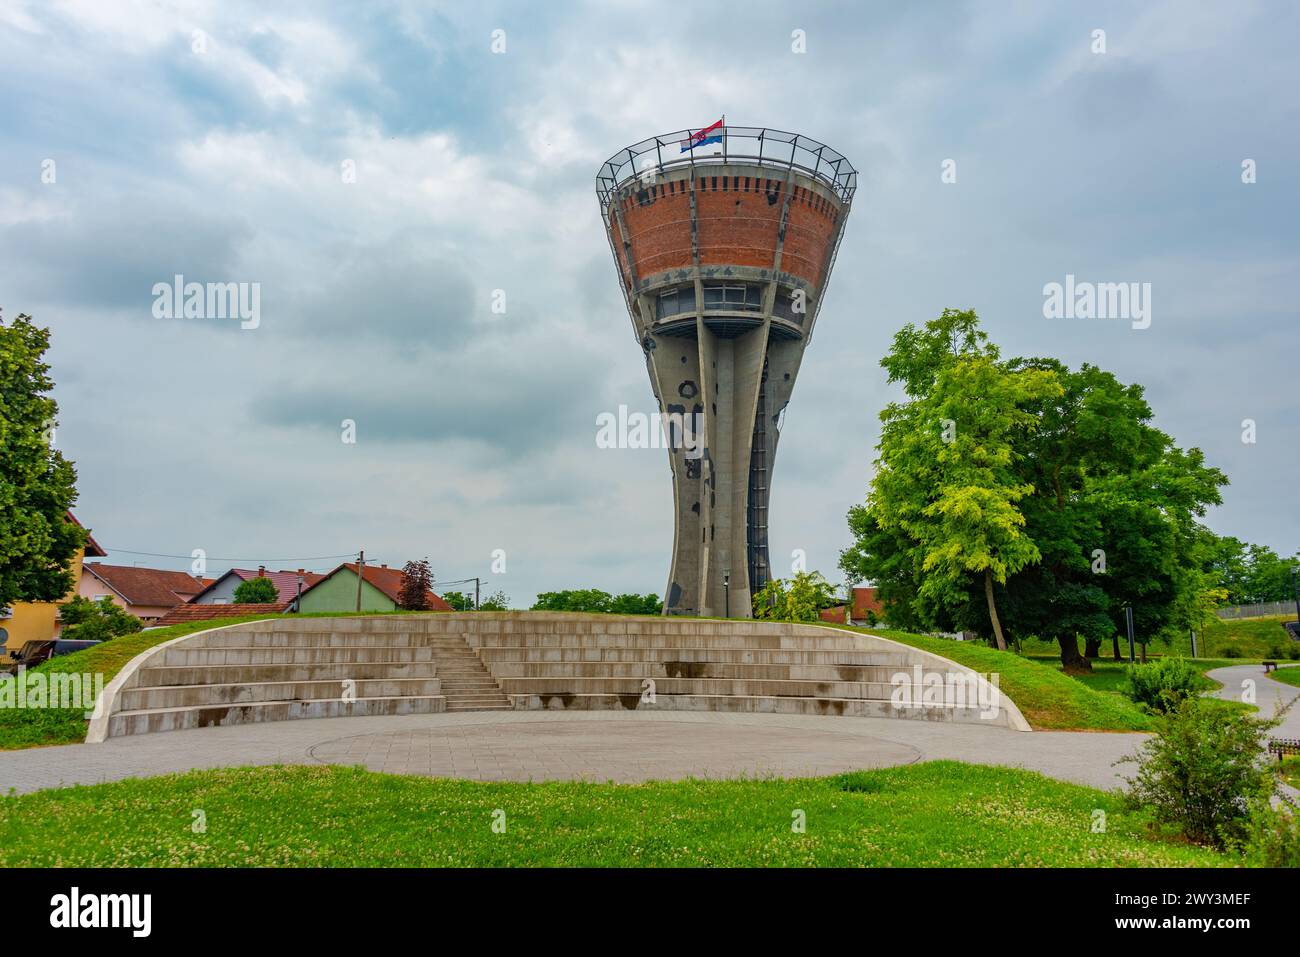 The water tower in Croatian town Vukovar Stock Photo